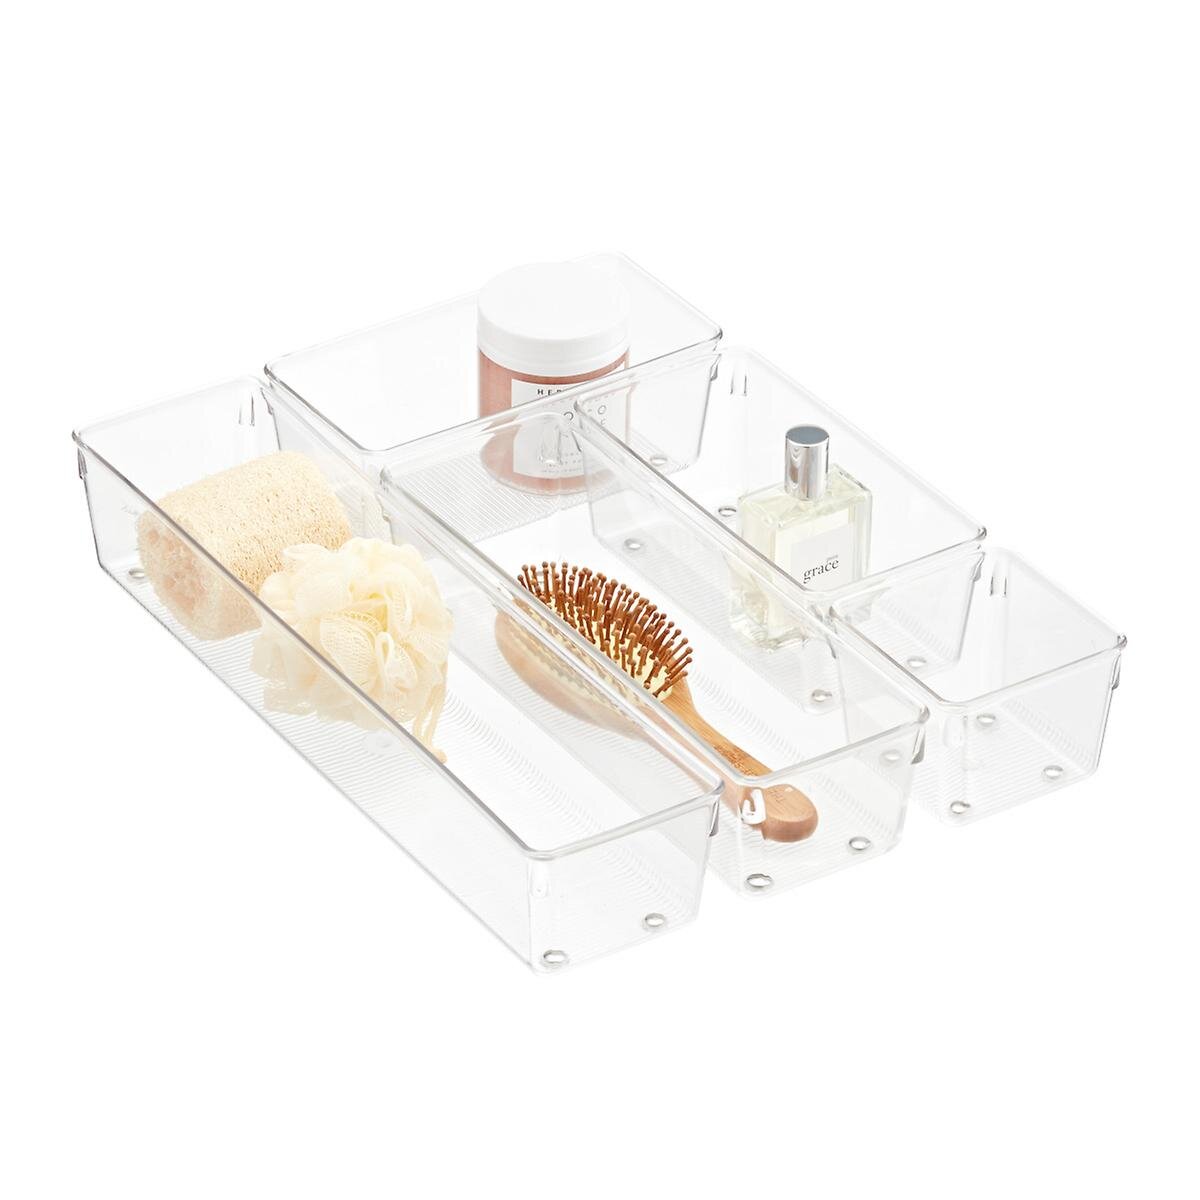 Great for slightly deeper drawers, more space for products in each divider!